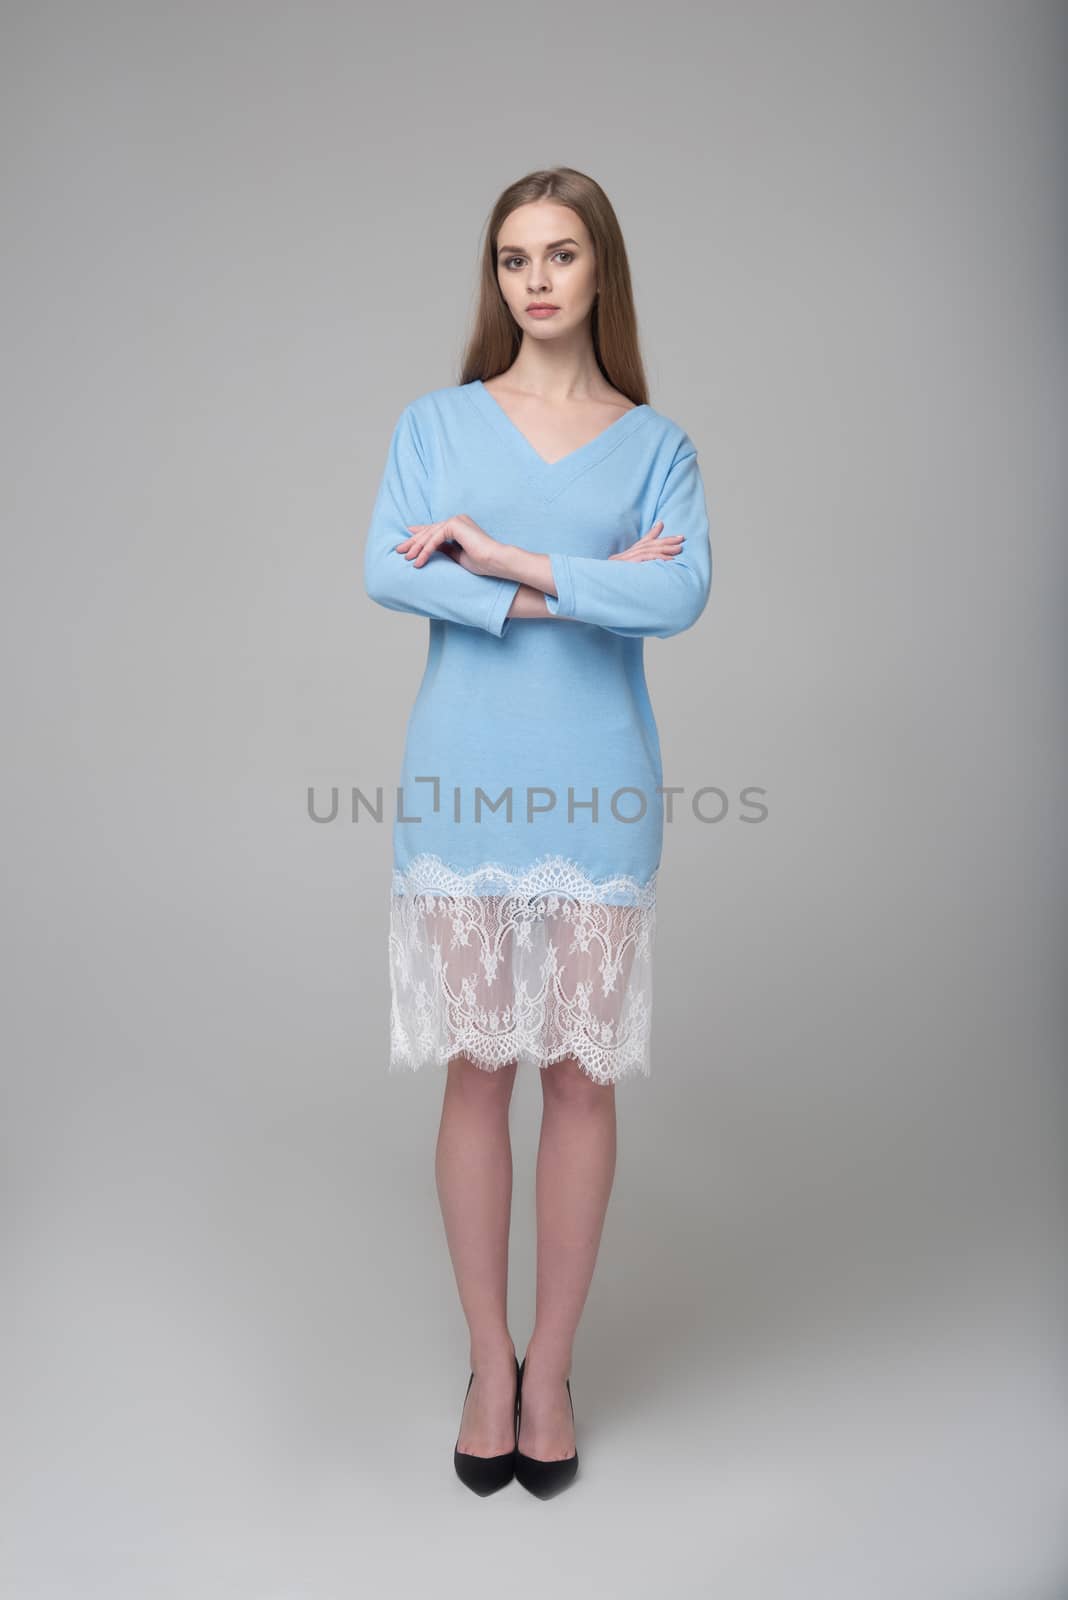 Young beautiful long-haired female model poses in blue dress with white lace on grey background